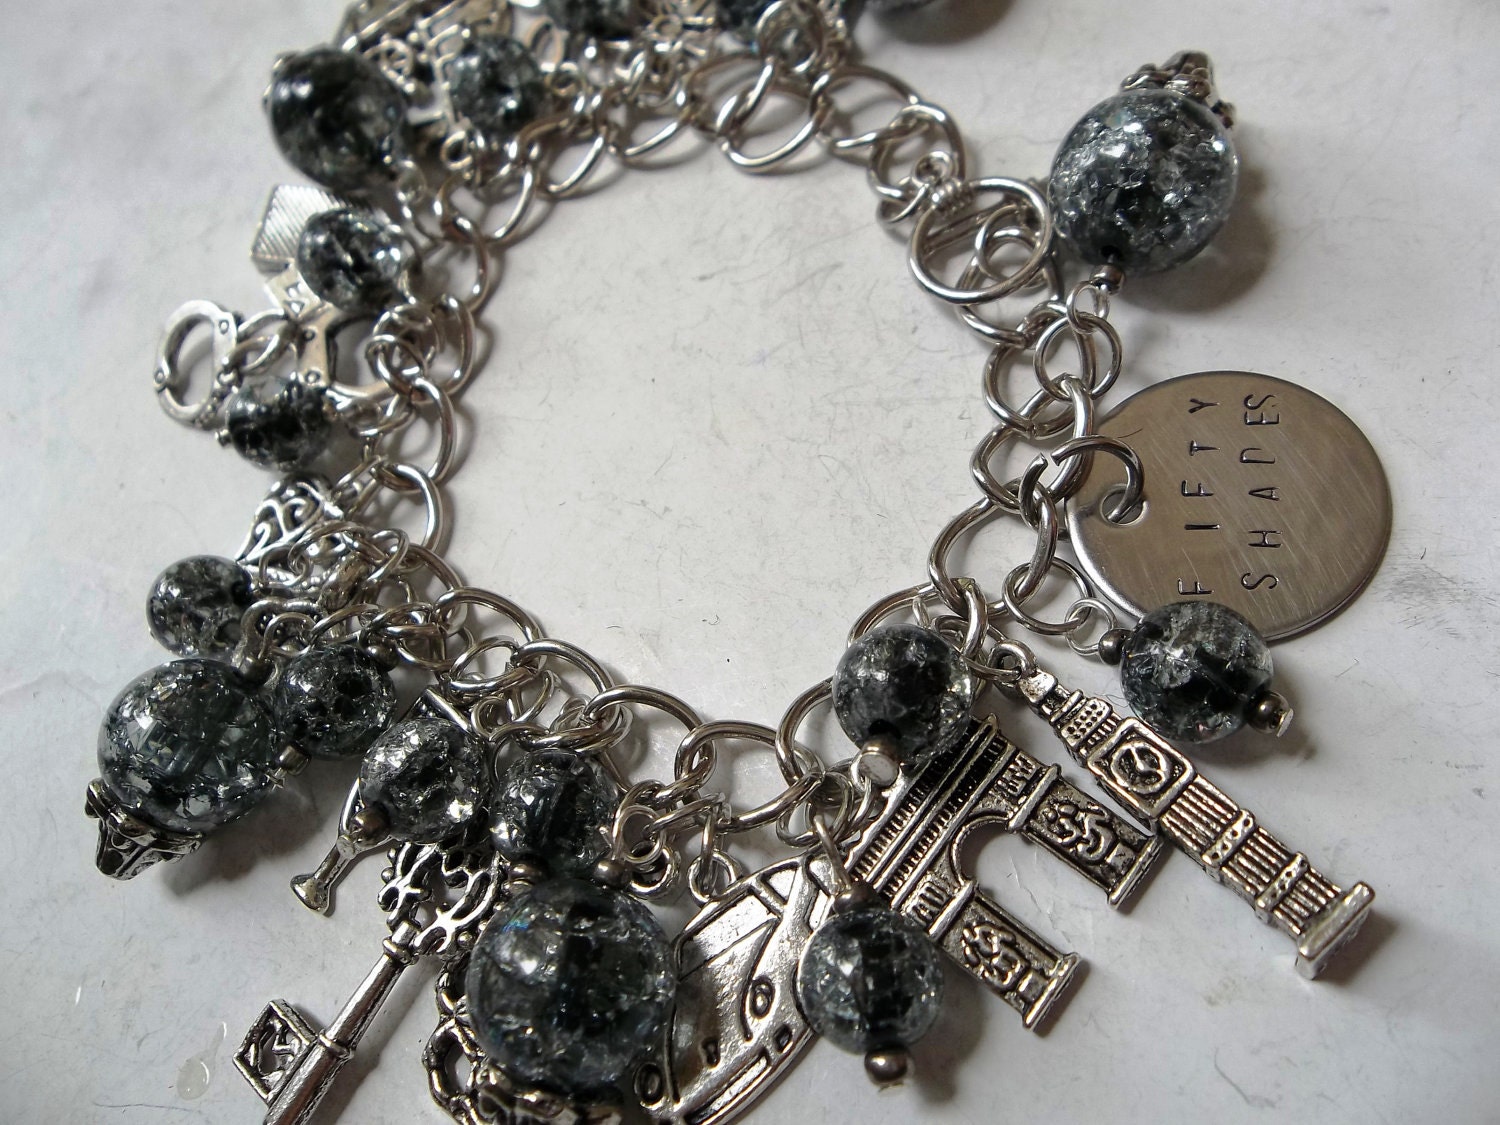 The Ultimate Fifty Shades Charm Bracelet Hand Stamped w/Tons of Charms & Glass Beads Inspired by the Book